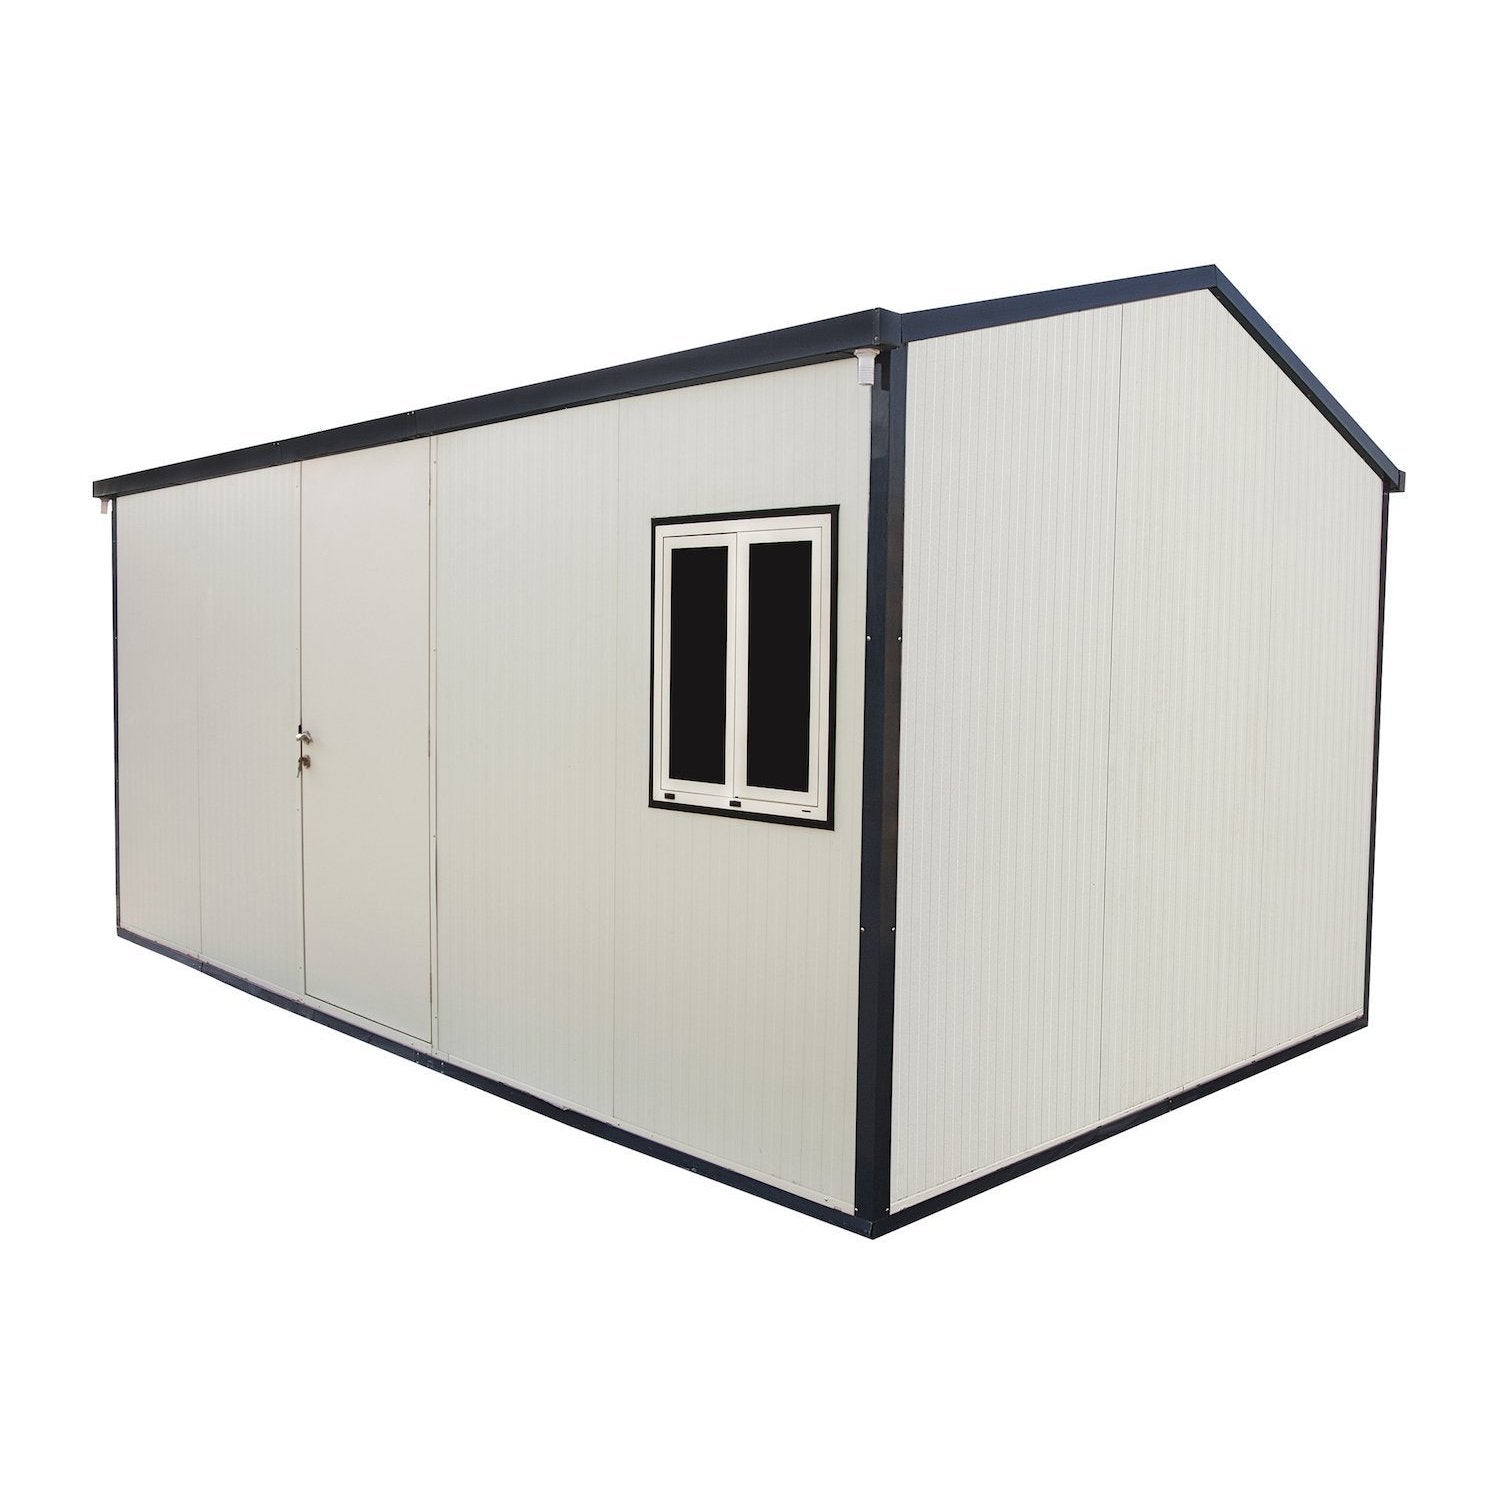 Duramax Insulated Buildings Gable Top Insulated Building 16x10